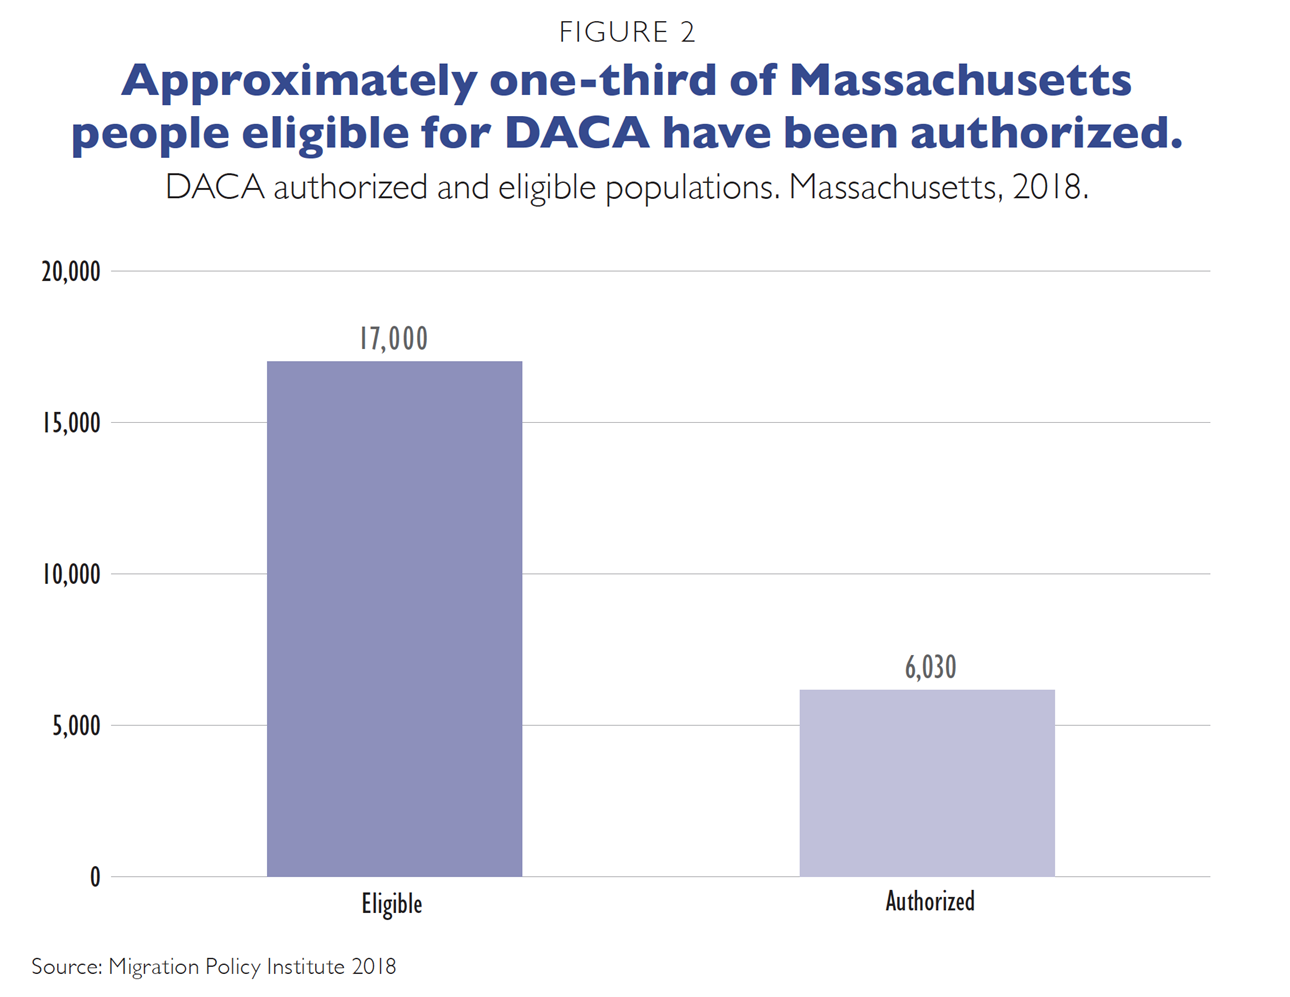 DACA applications and authorizations in Mass.